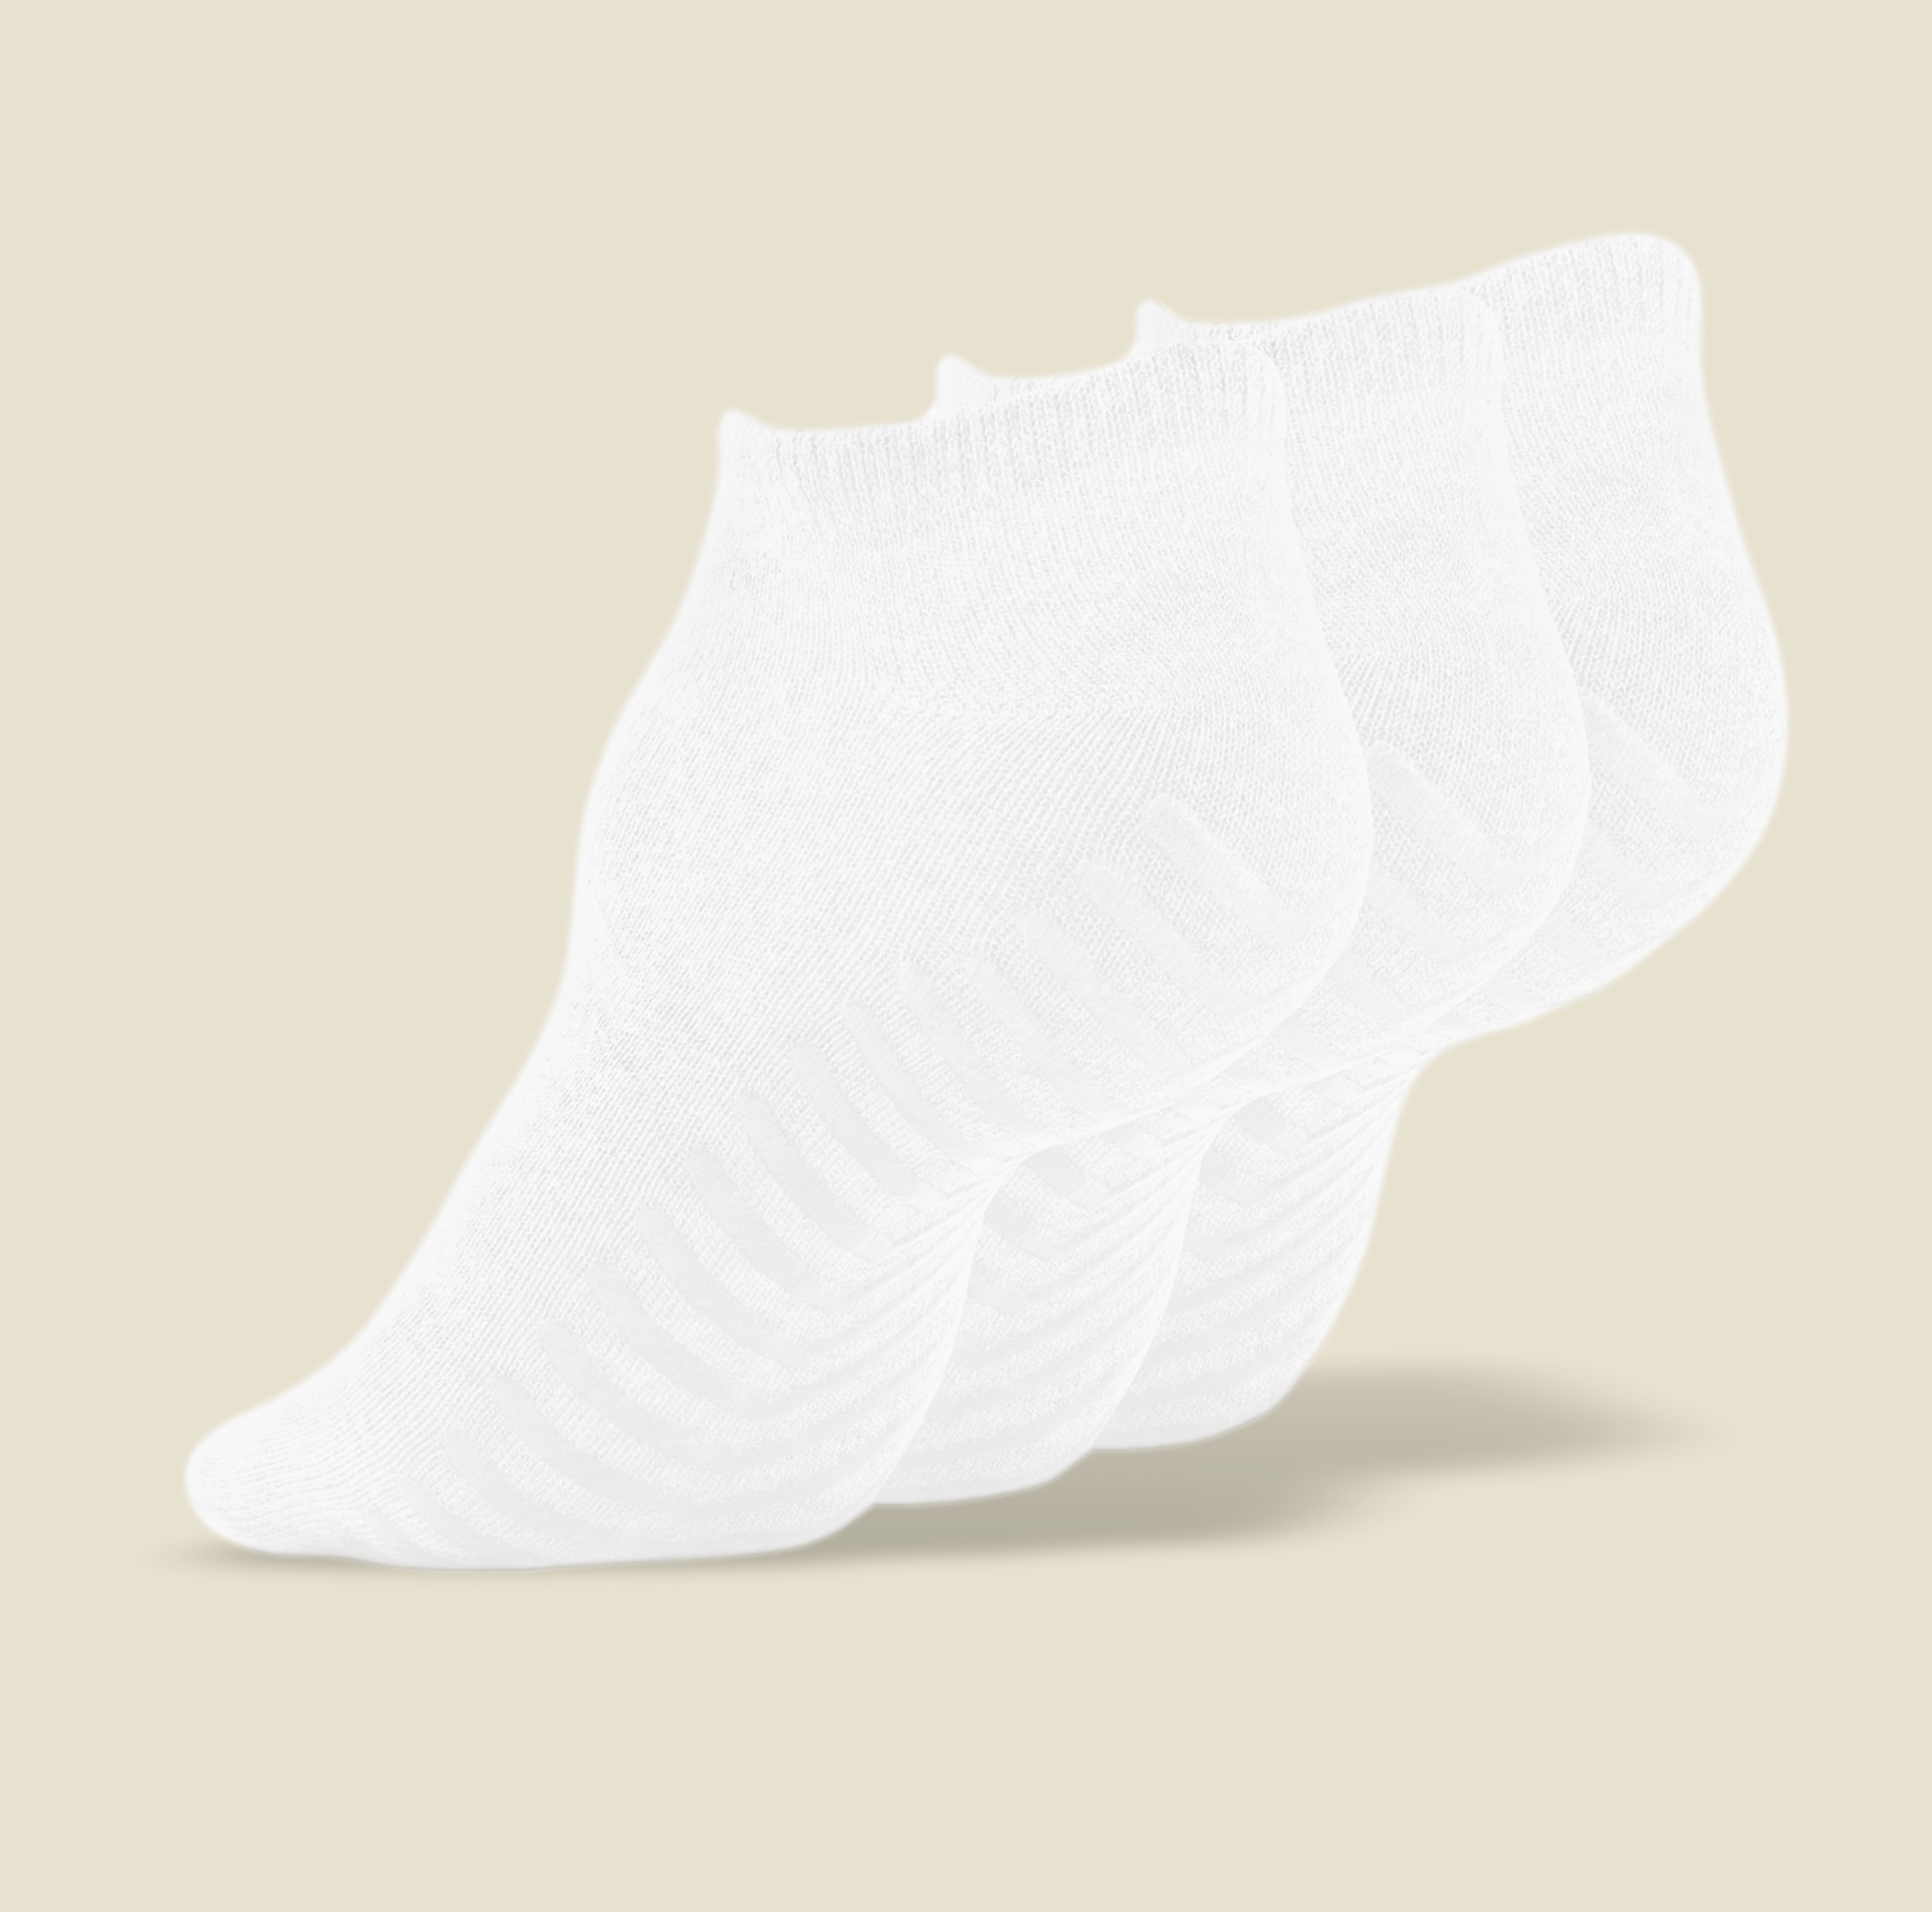  Gripjoy Non-Binding Diabetic Socks with Grippers